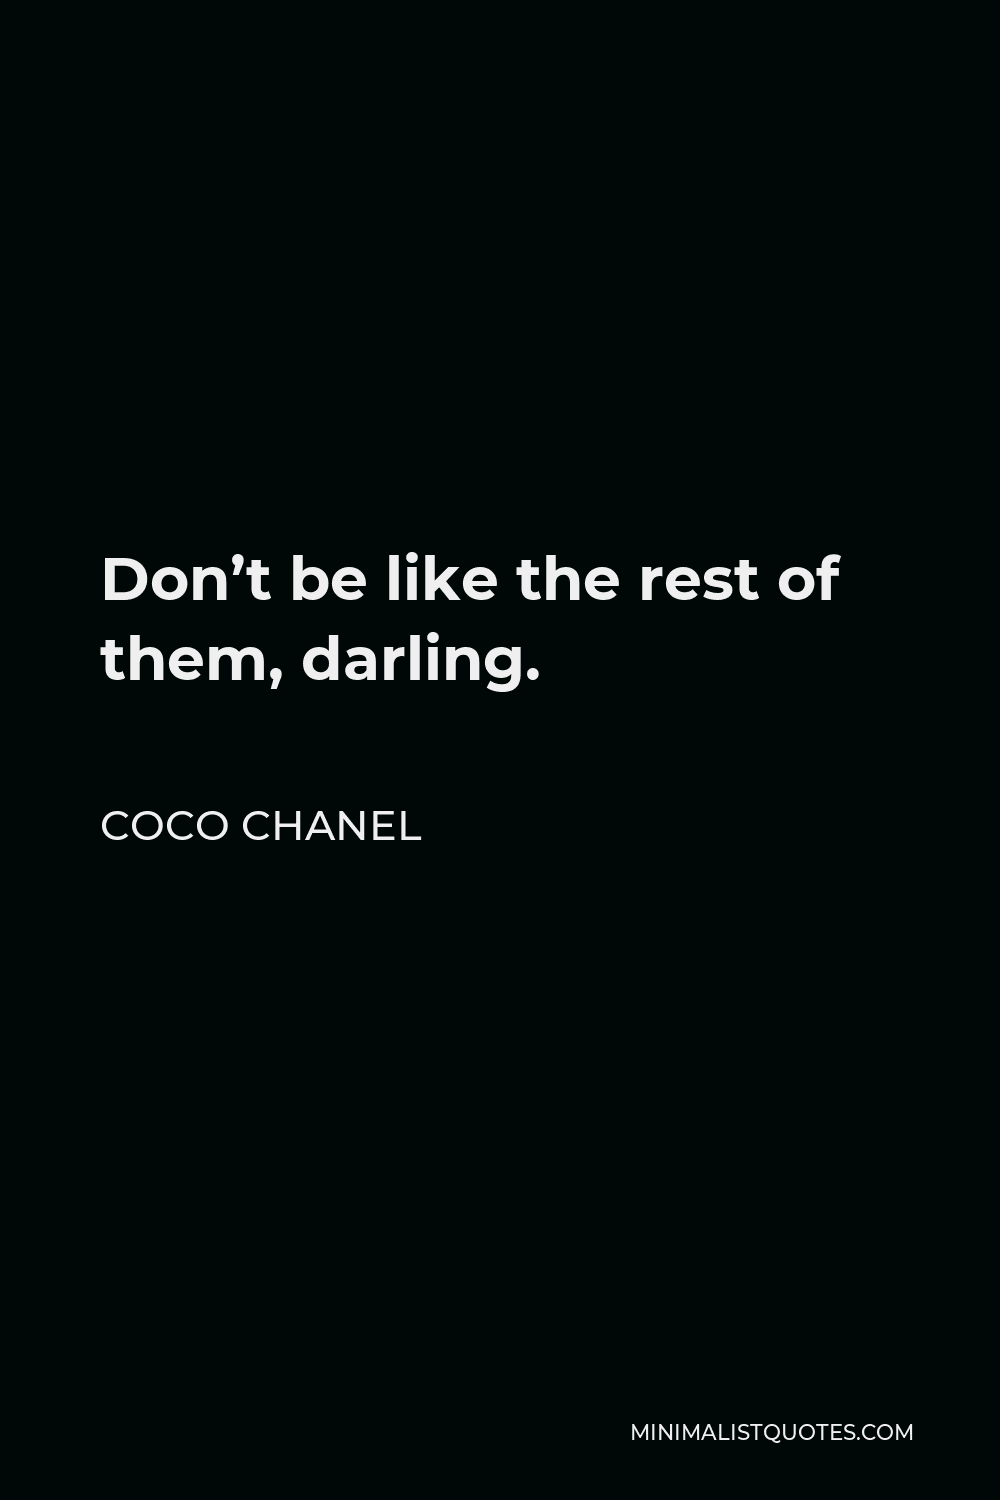 Coco Chanel Quote: Don't be like the rest of them, darling.